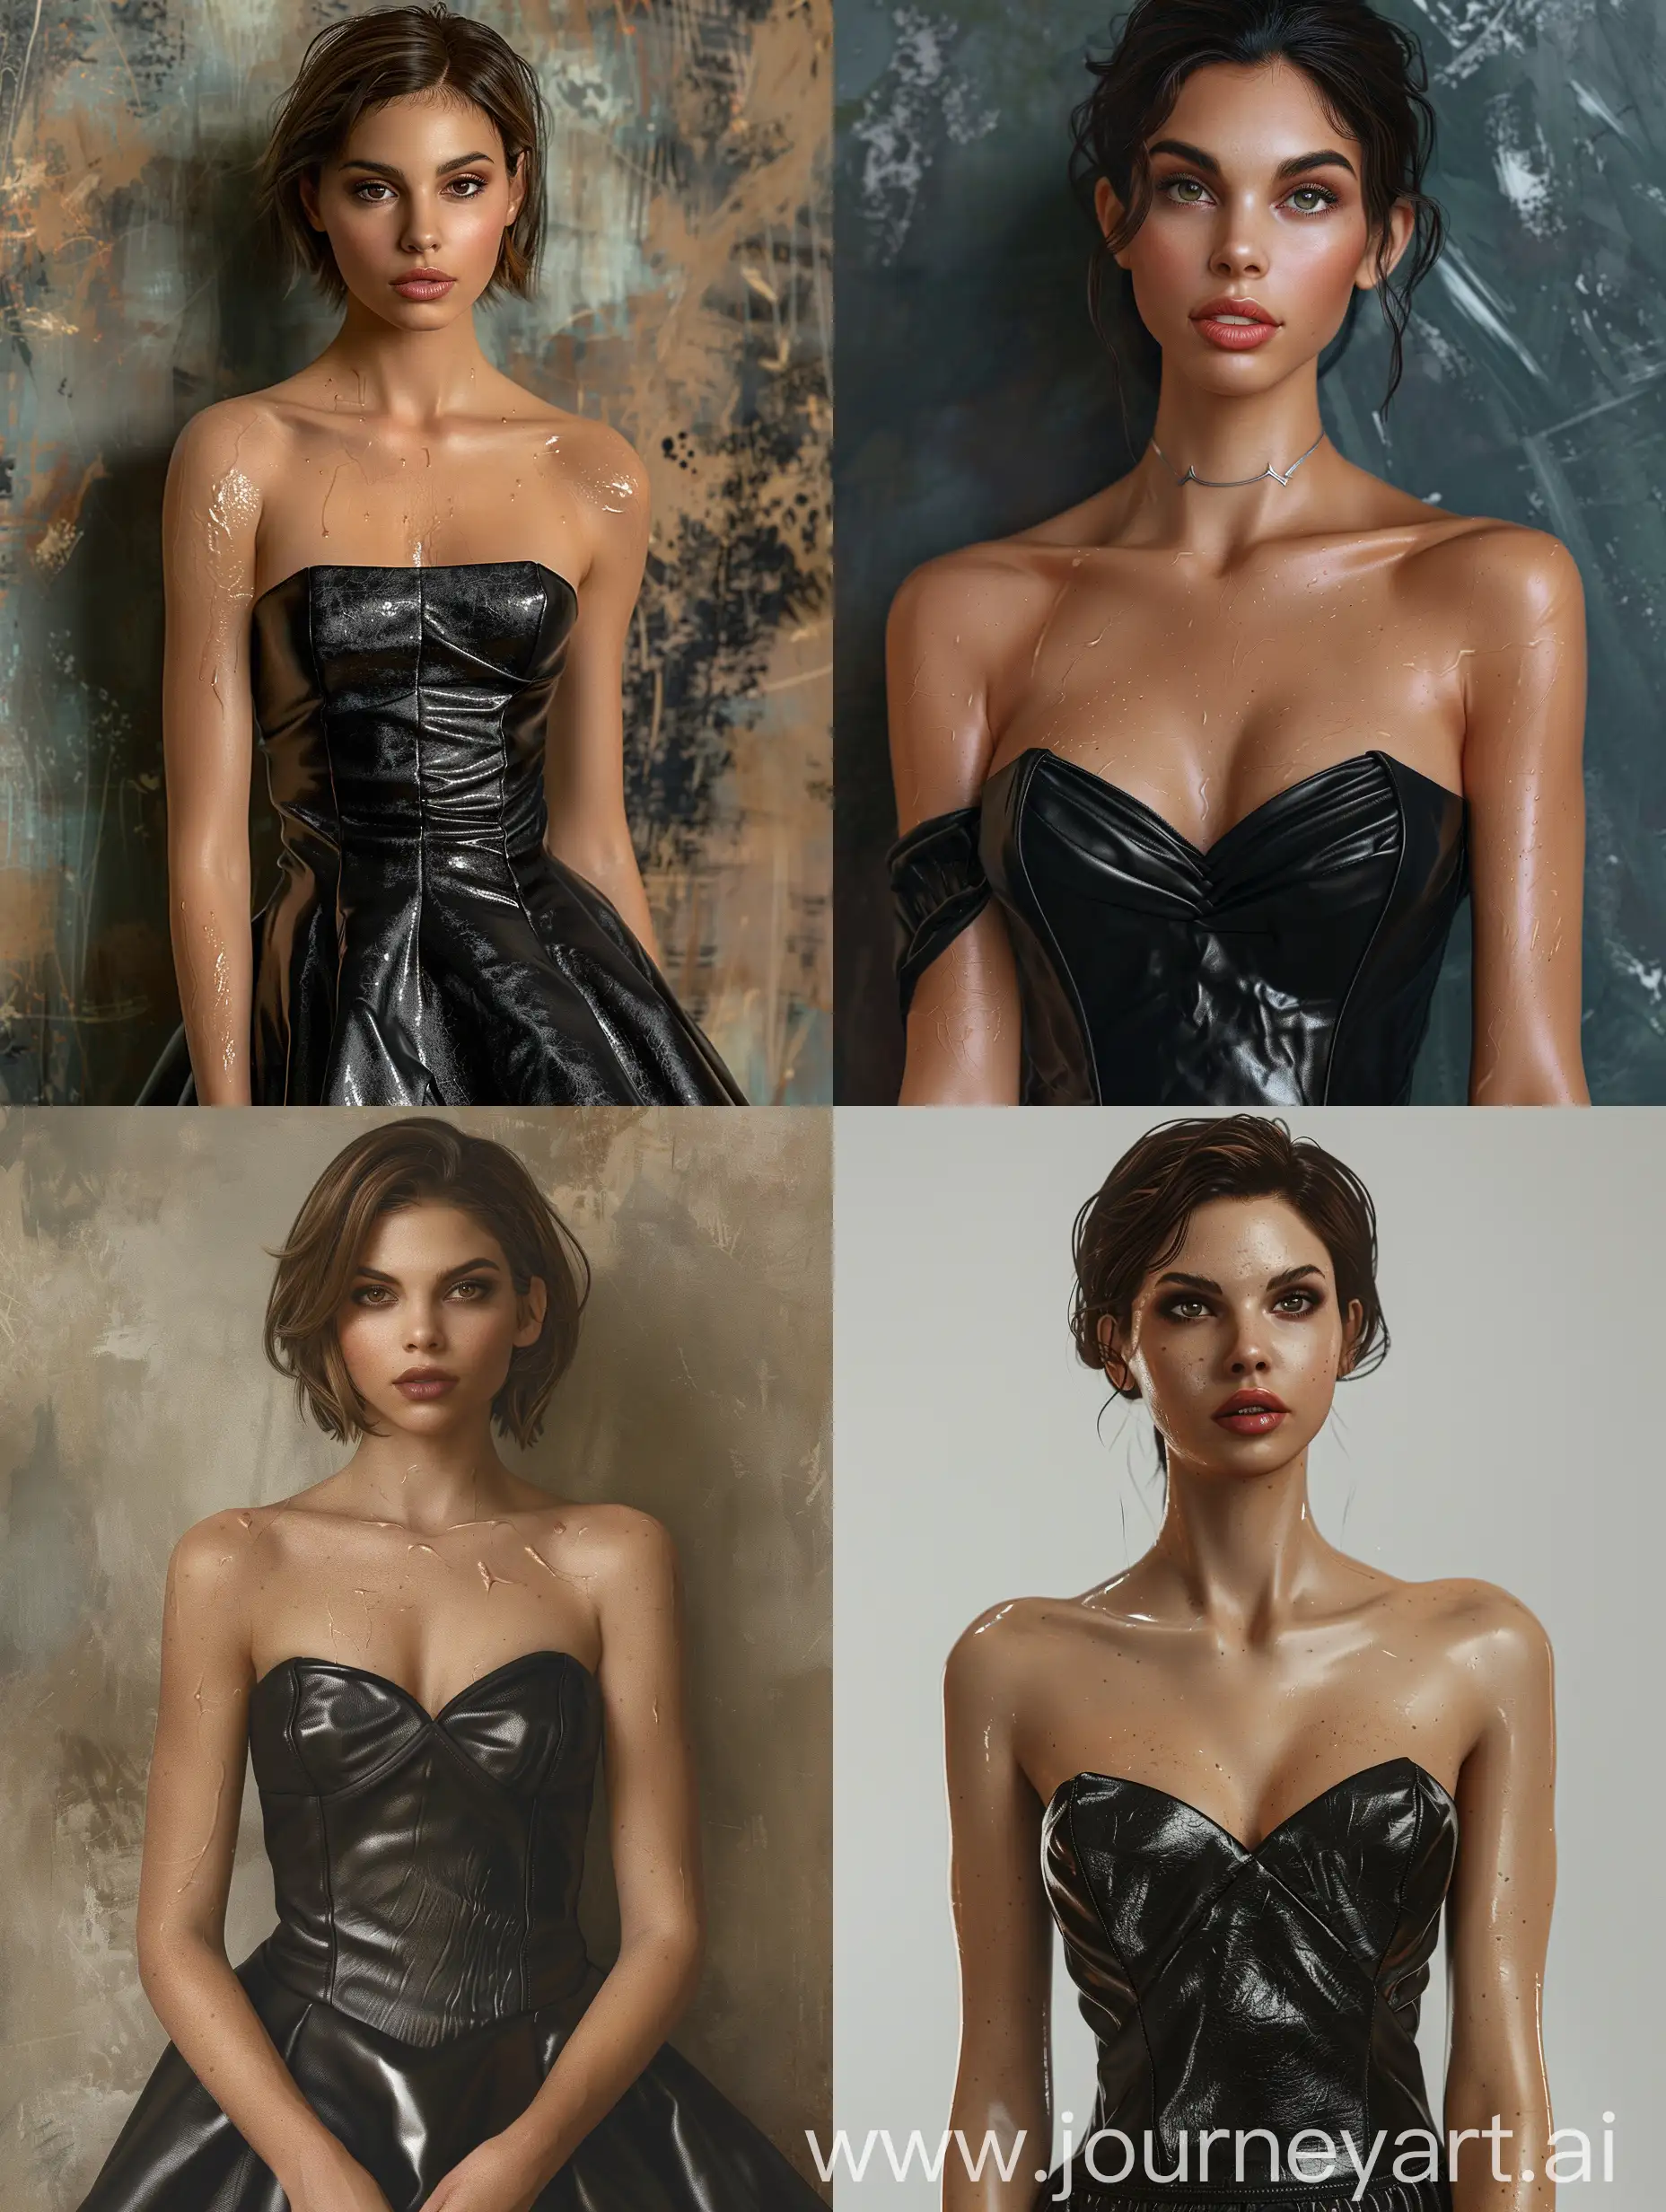 Victoria Justice in a black leather strapless dress, photorealism, skin texture, pores, hdr